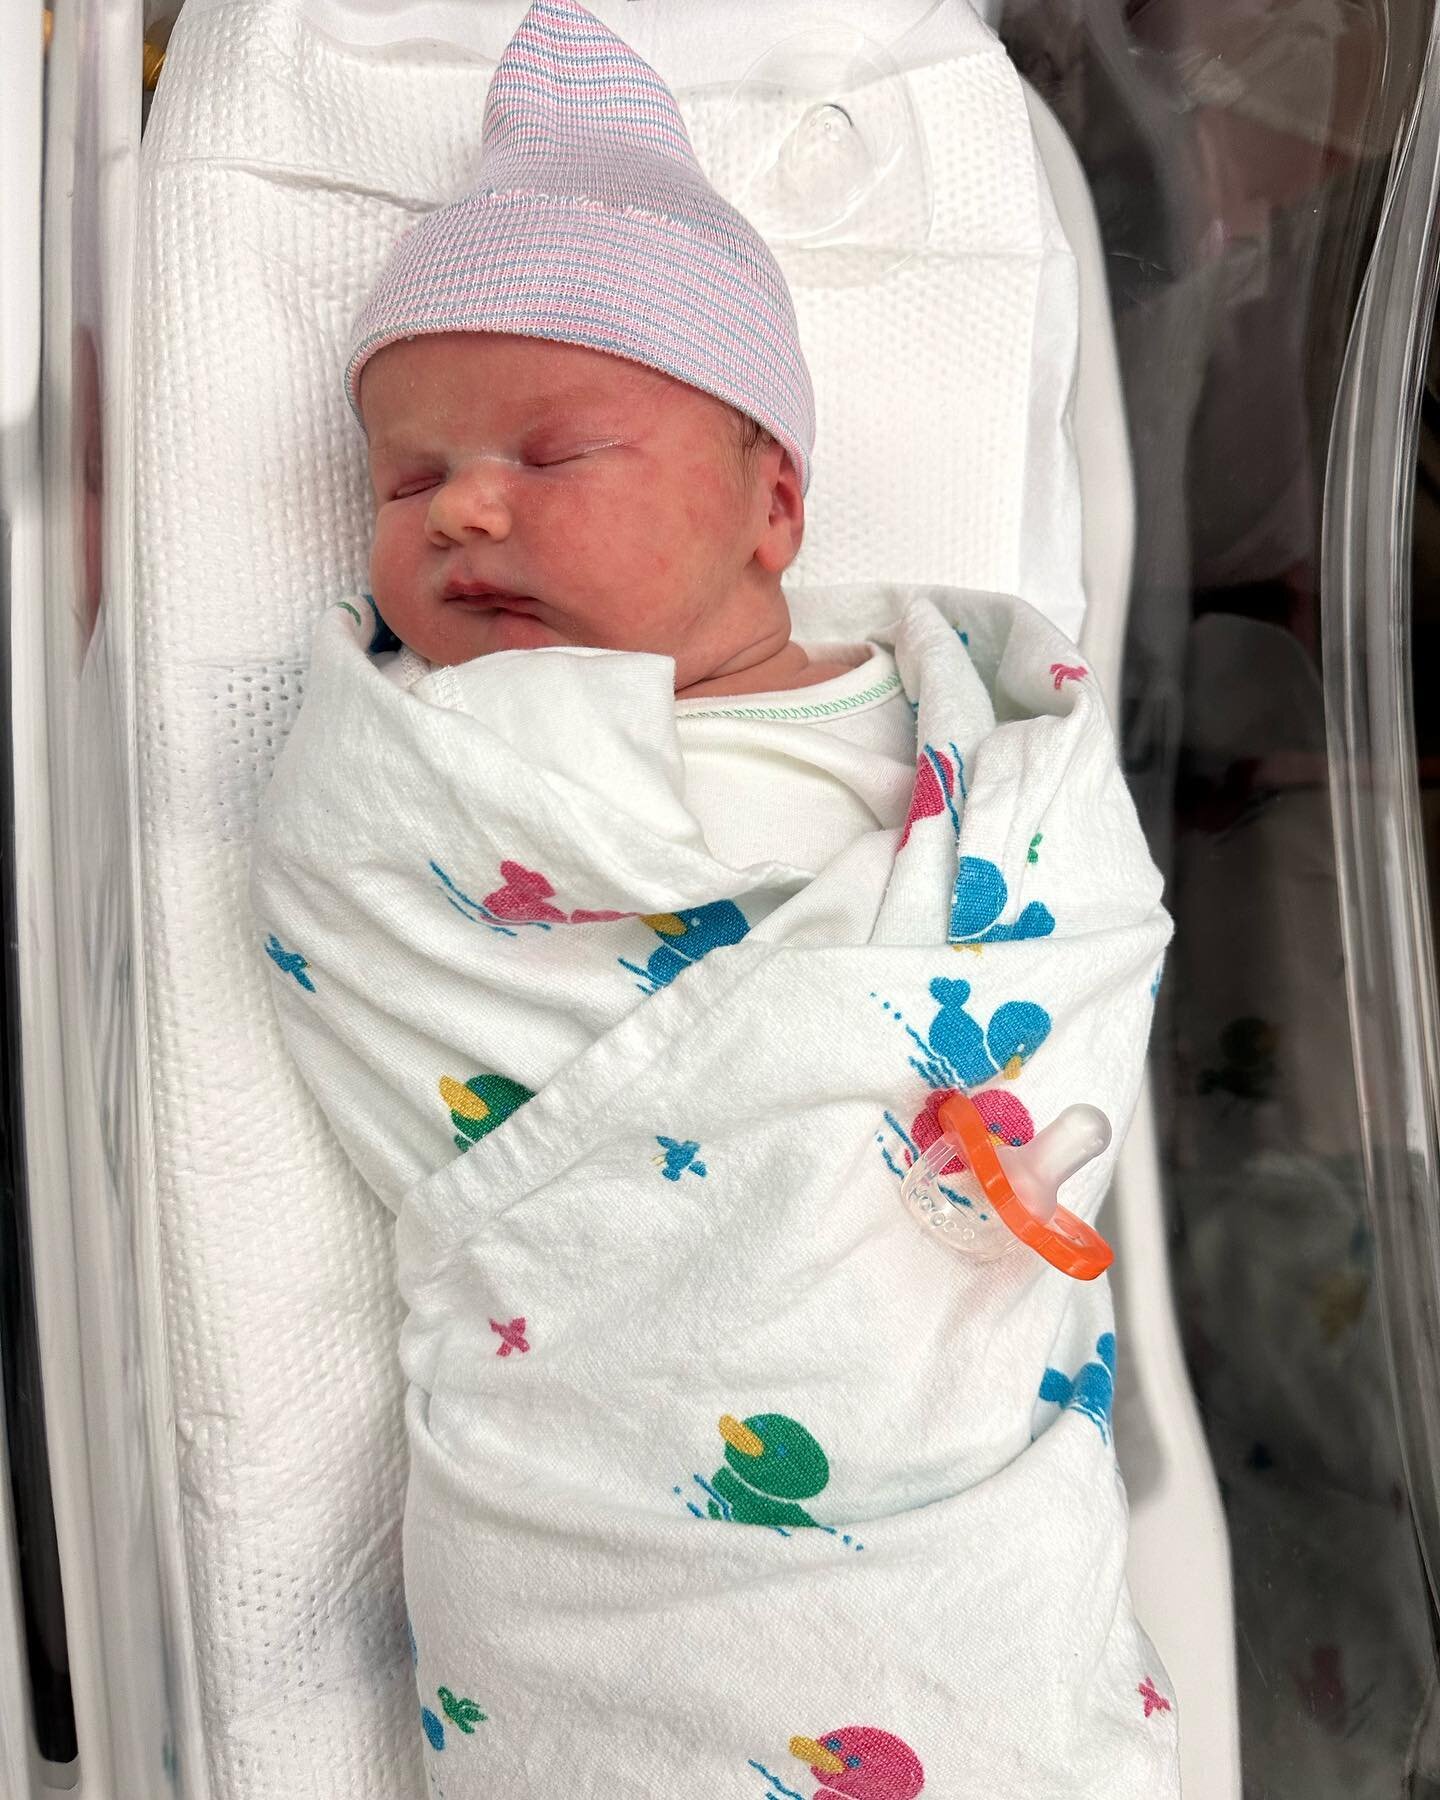 She&rsquo;s here! Welcome to our world Dillon Mae Creech! We are so blessed and thankful to welcome our first grandchild! Milltown will be open today (Sat) our usual hours 8-12.  Pop in and celebrate with us! 🎉 🙌🏻